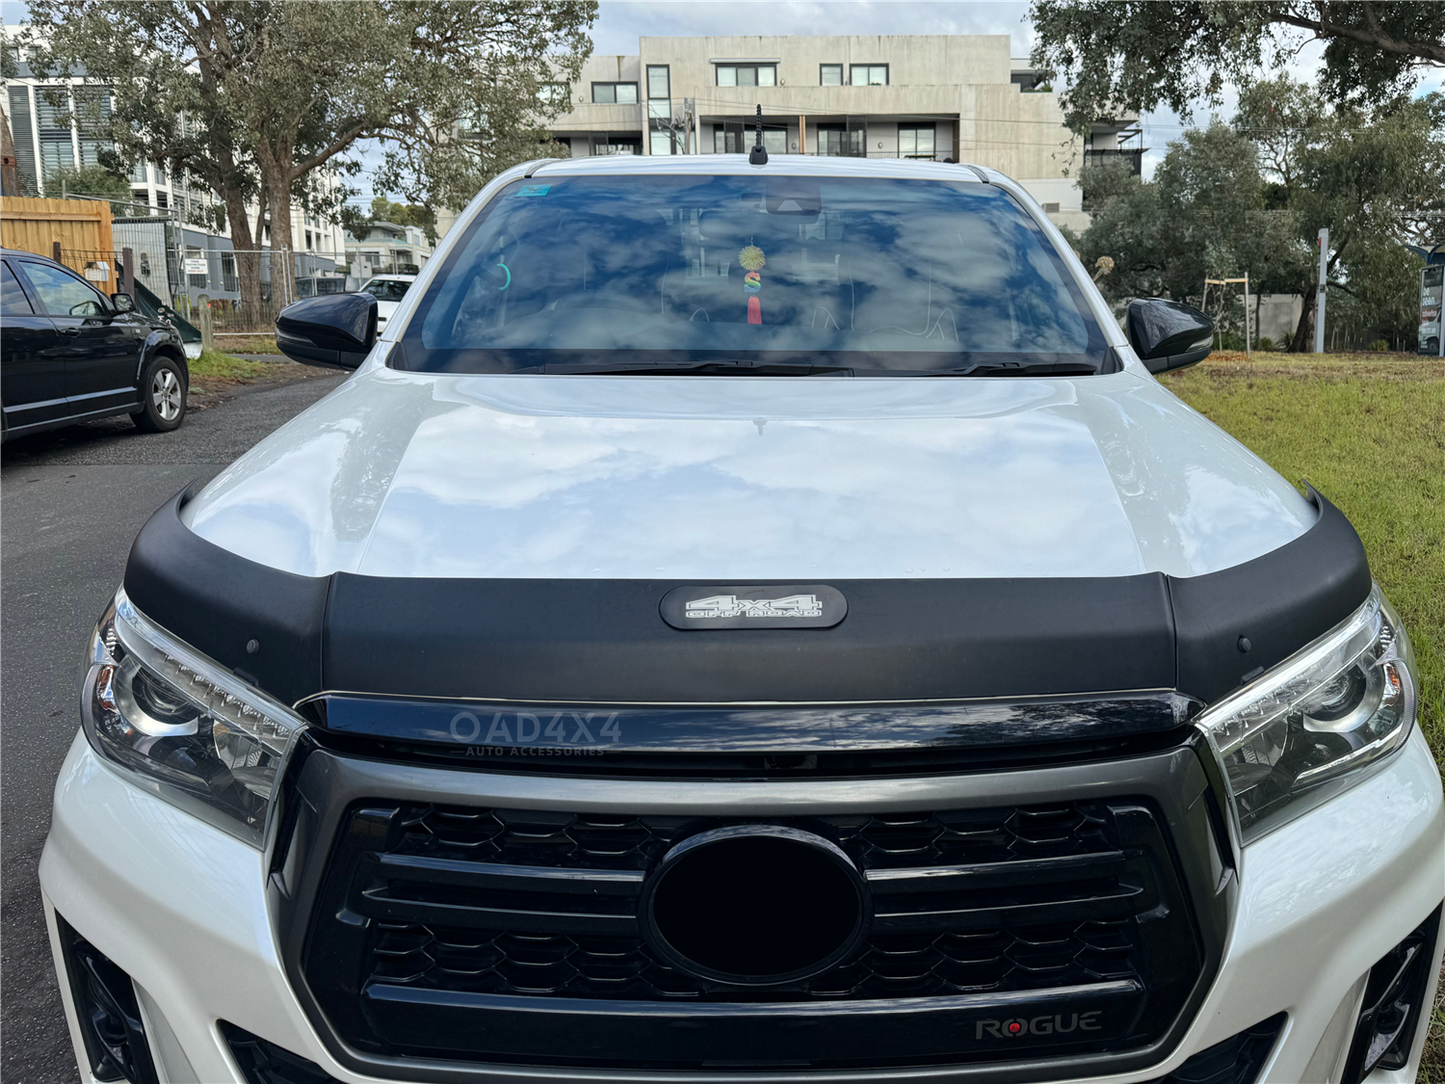 Injection Modeling Bonnet Protector & Injection Weathershield for Toyota Hilux Dual Cab 2015-2020 Weather Shields Window Visor Hood Protector Bonnet Guard